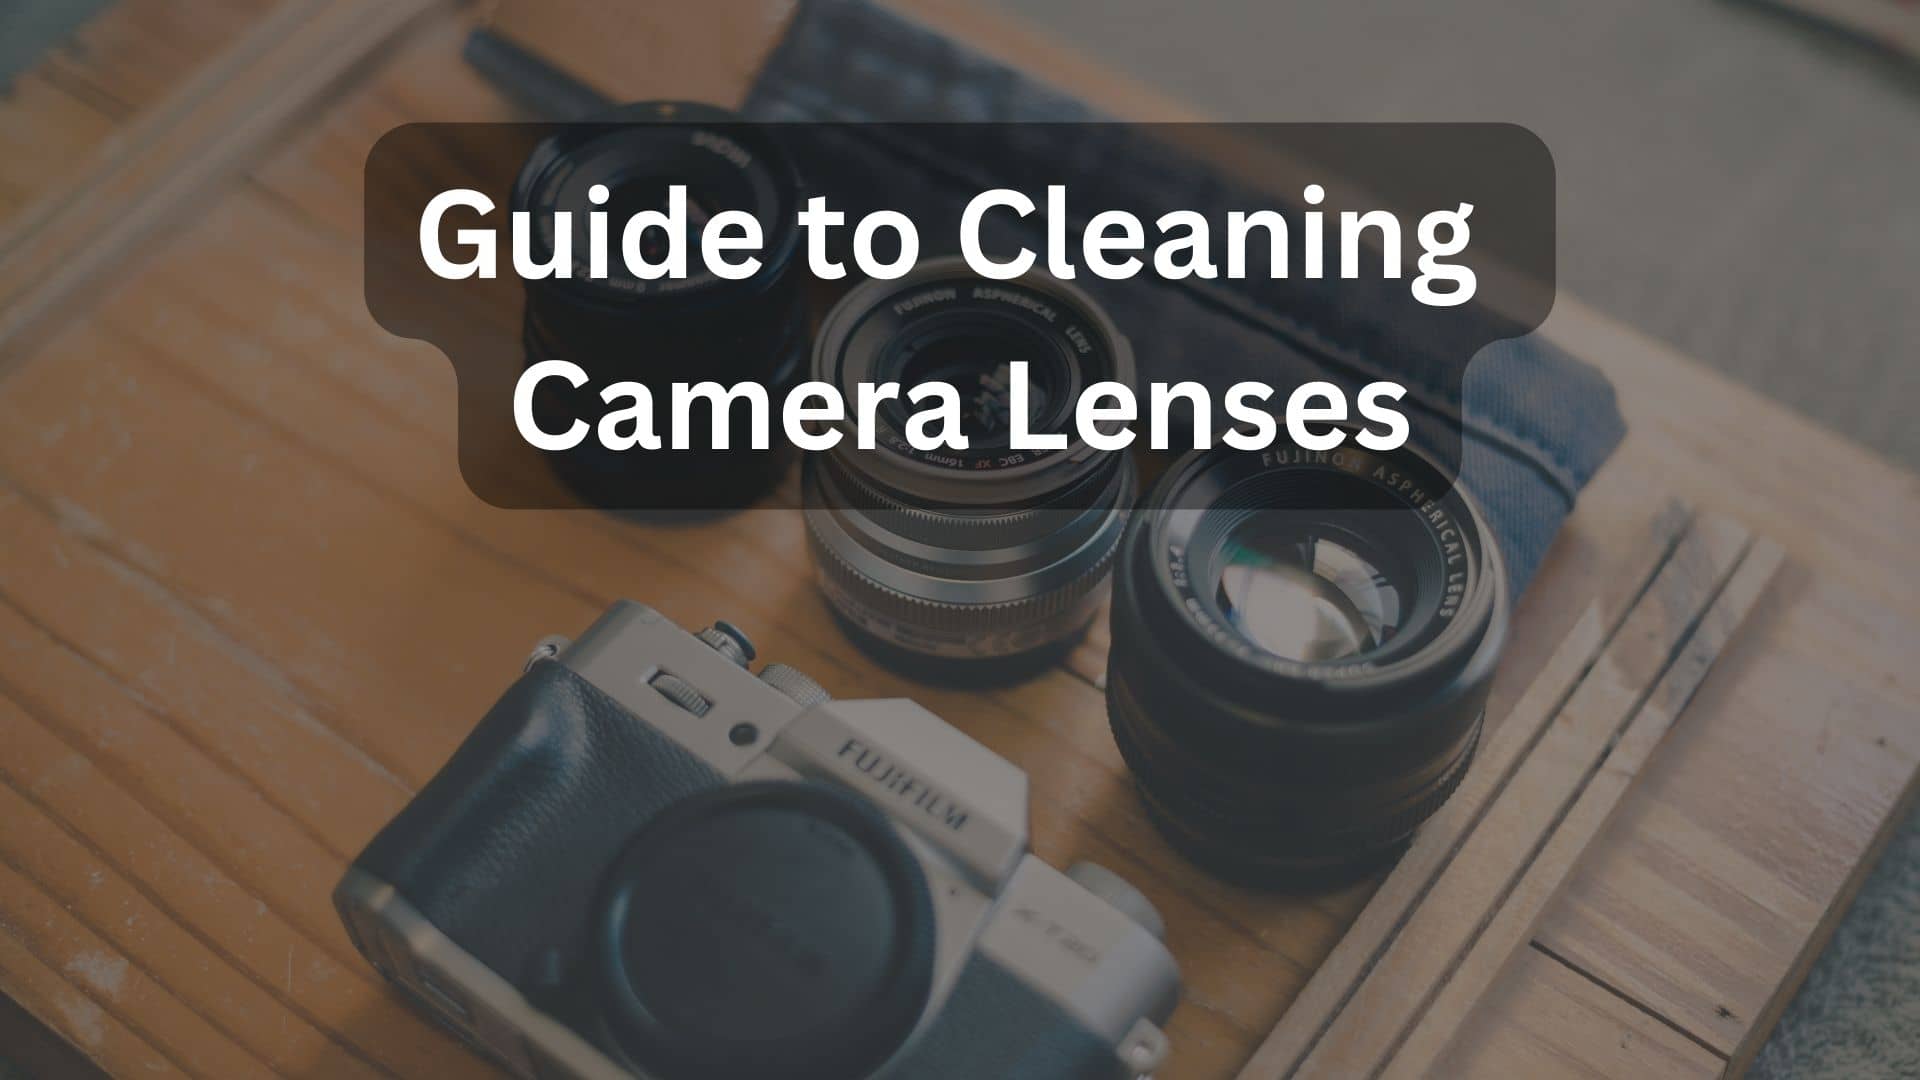 The Ultimate Guide to Cleaning Camera Lenses